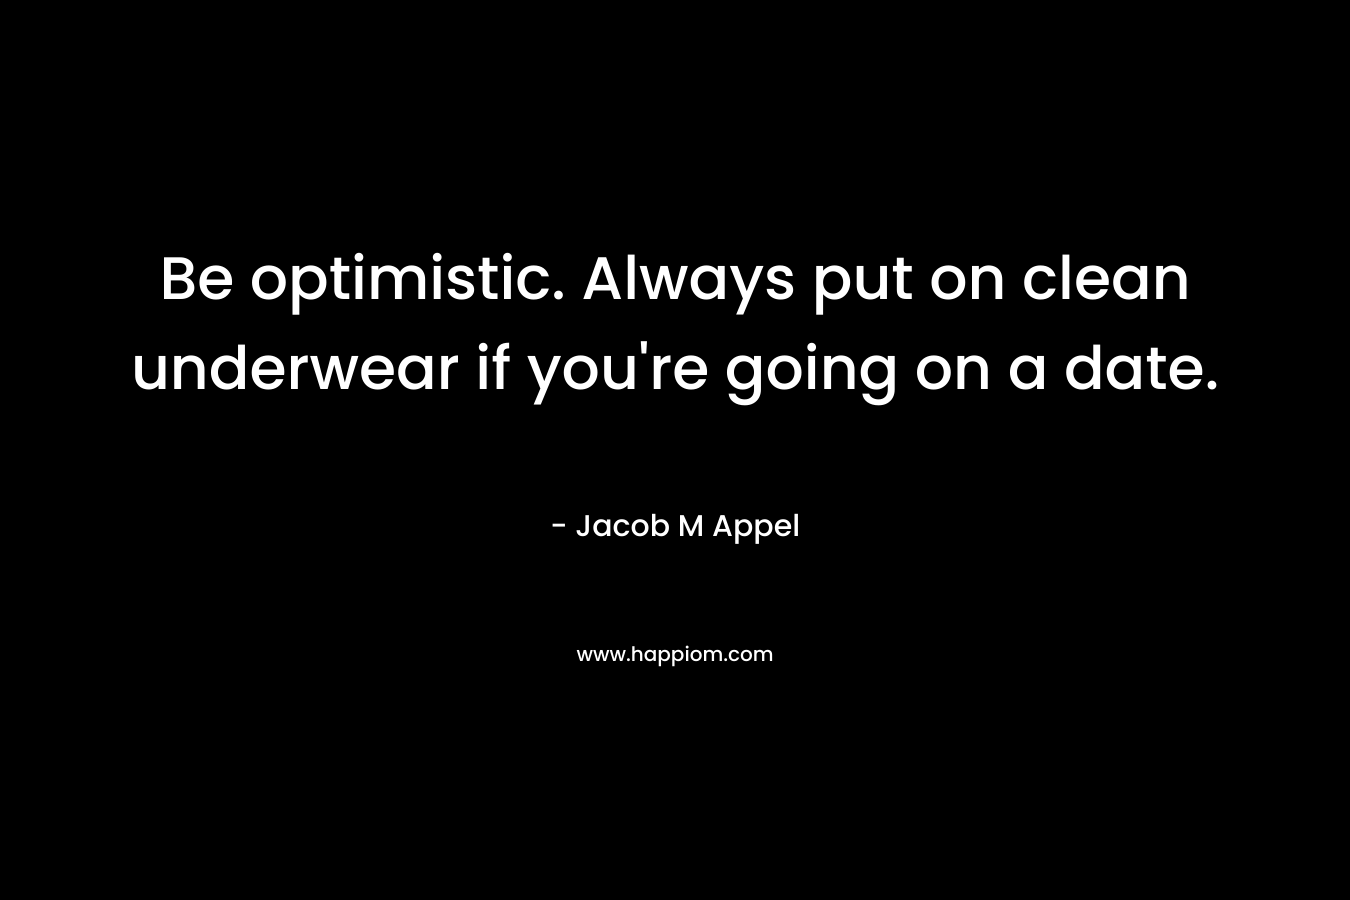 Be optimistic. Always put on clean underwear if you're going on a date.